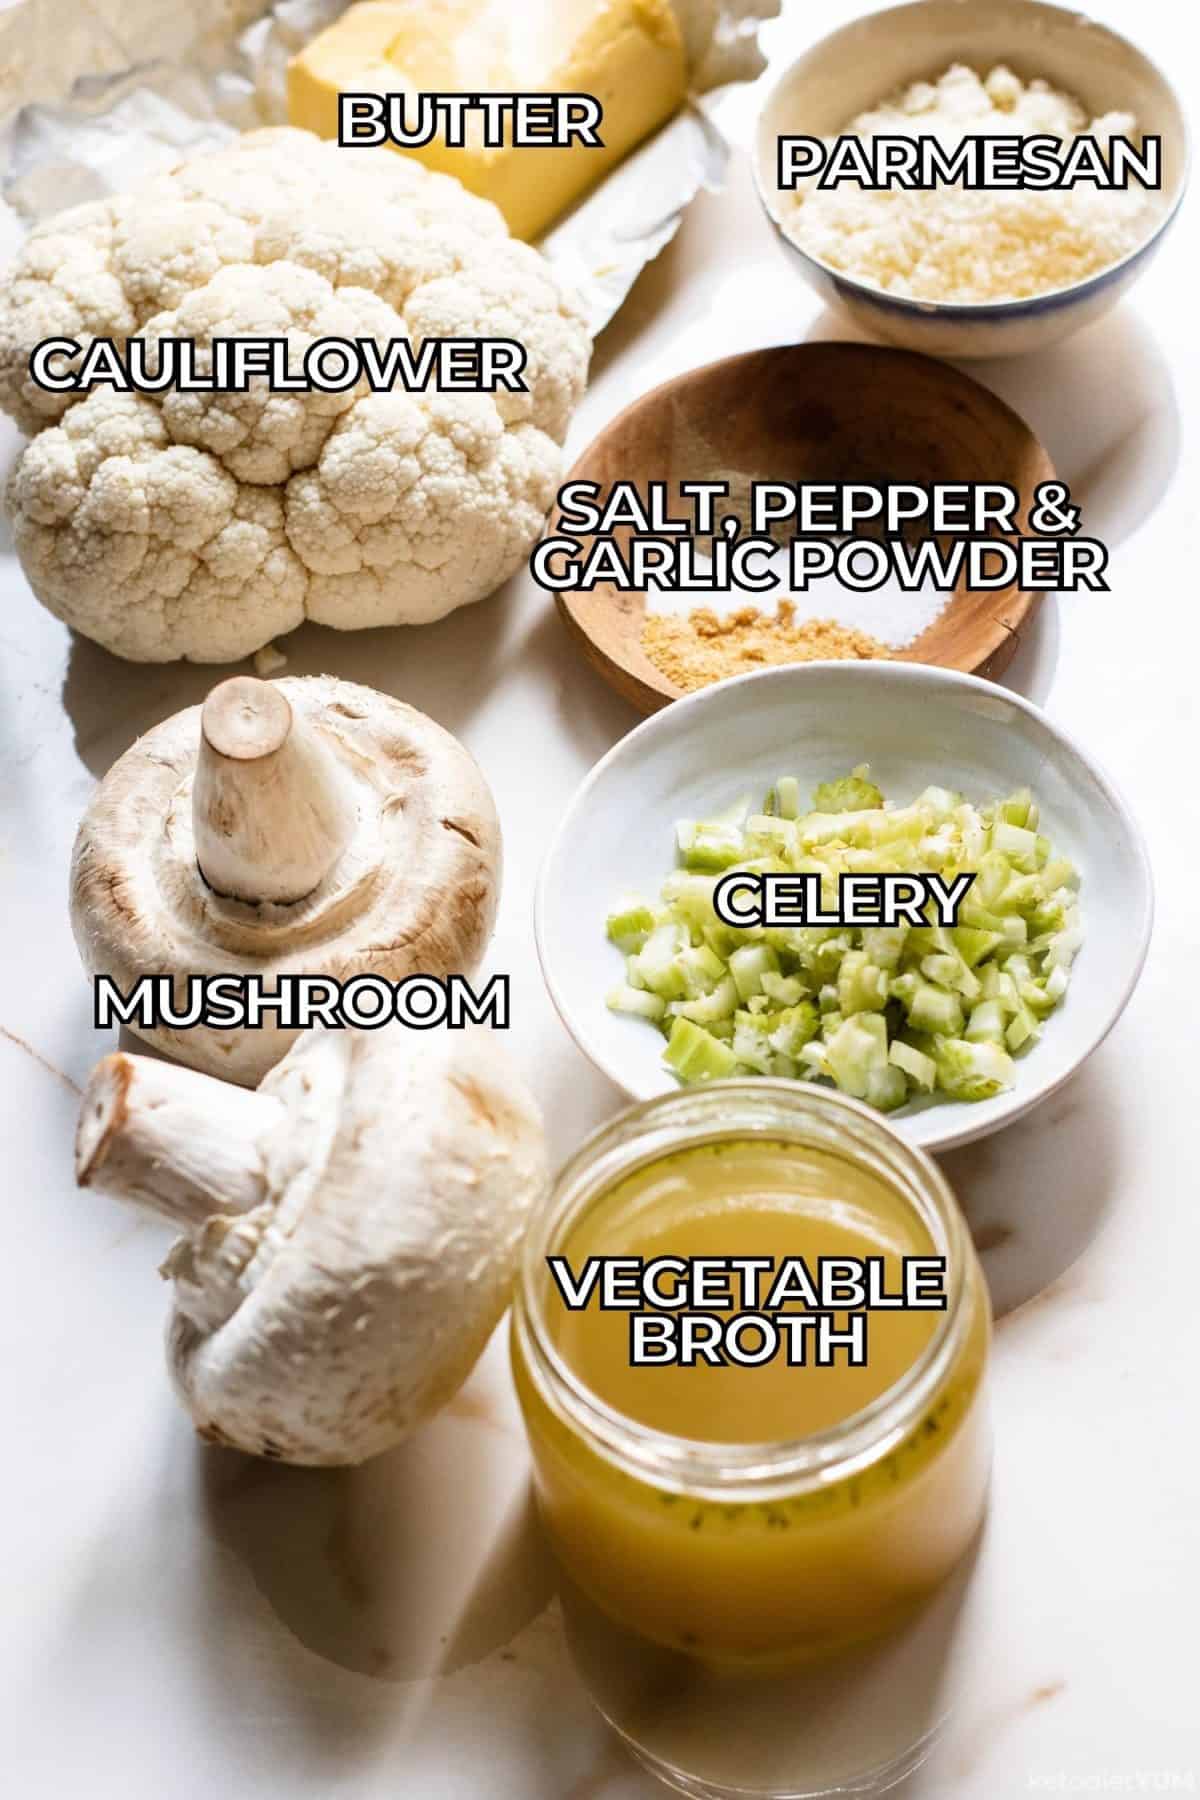 Ingredients used to make a low carb risotto are butter, Parmesan, cauliflower, seasonings, mushrooms, celery and vegetable broth